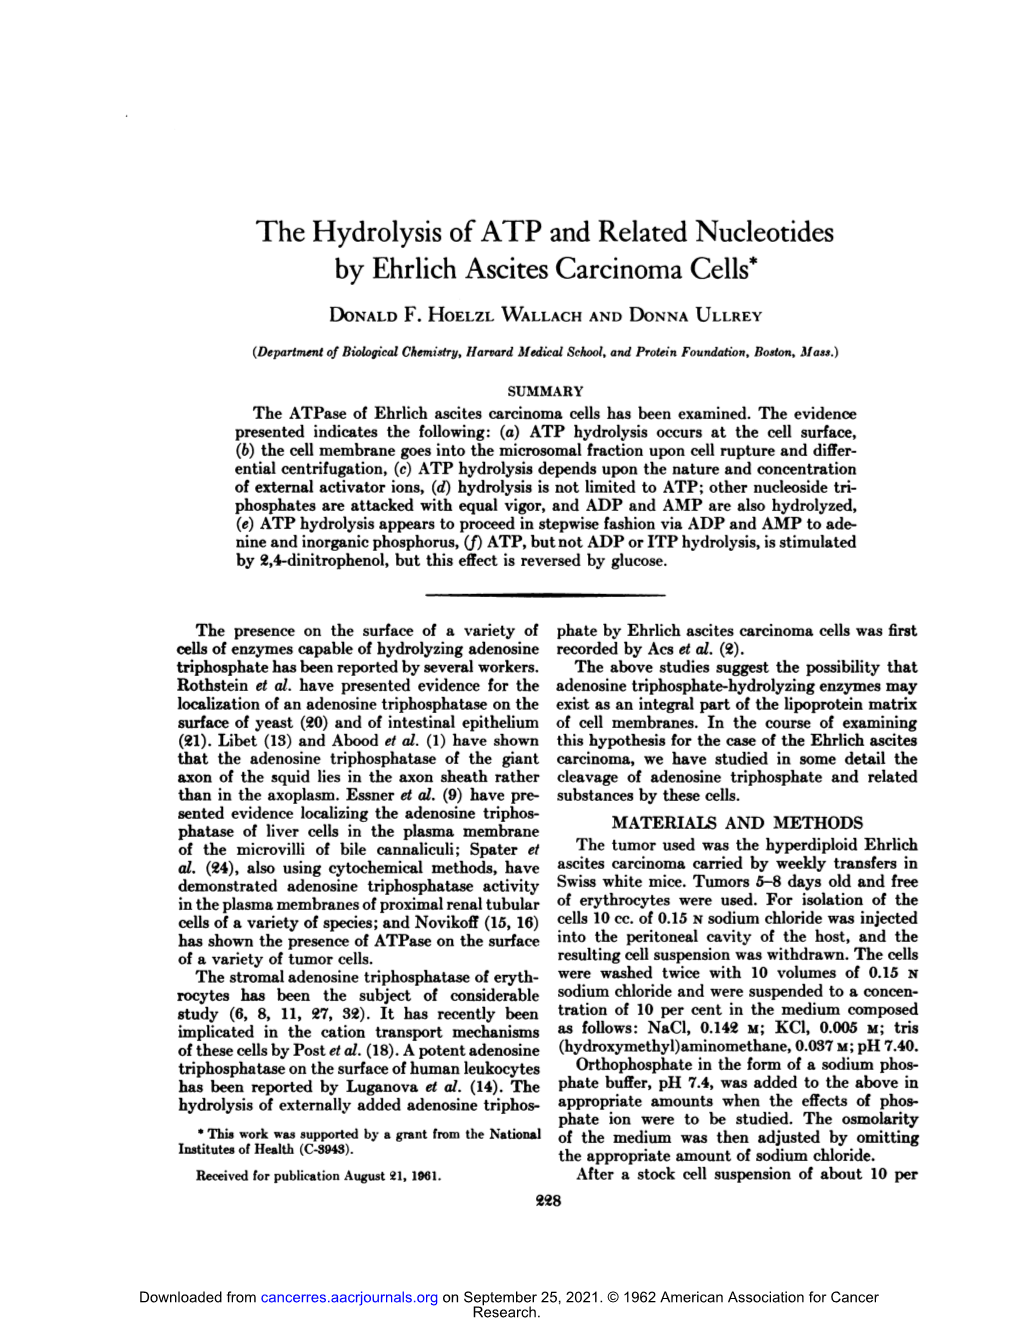 The Hydrolysis of ATP and Related Nucleotides by Ehrlich Ascites Carcinoma Cells*